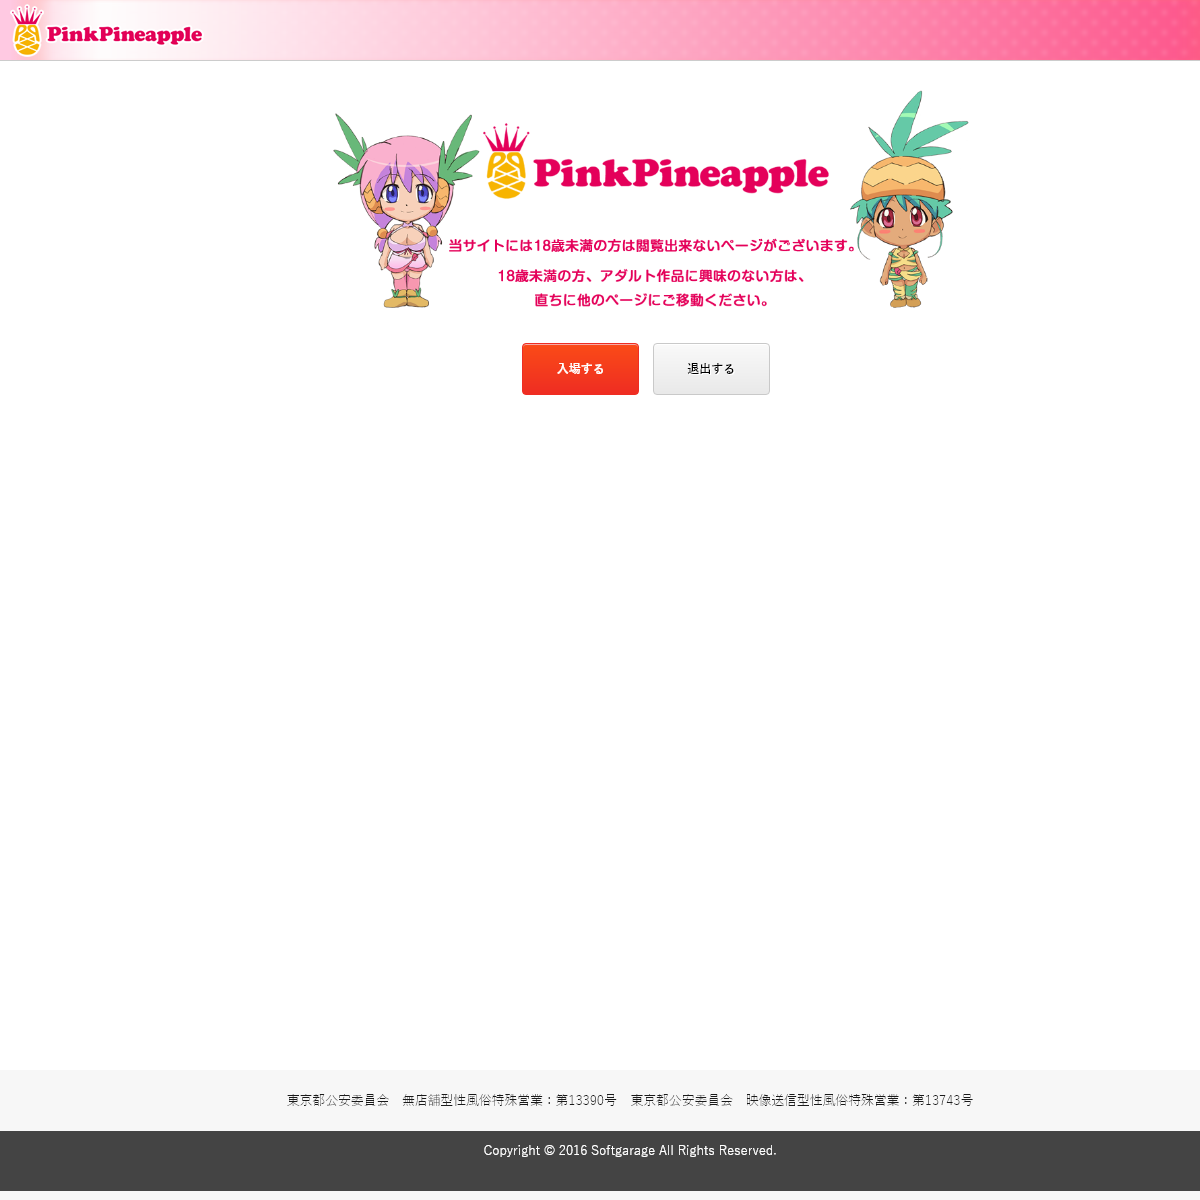 A complete backup of pinkpineapple.co.jp